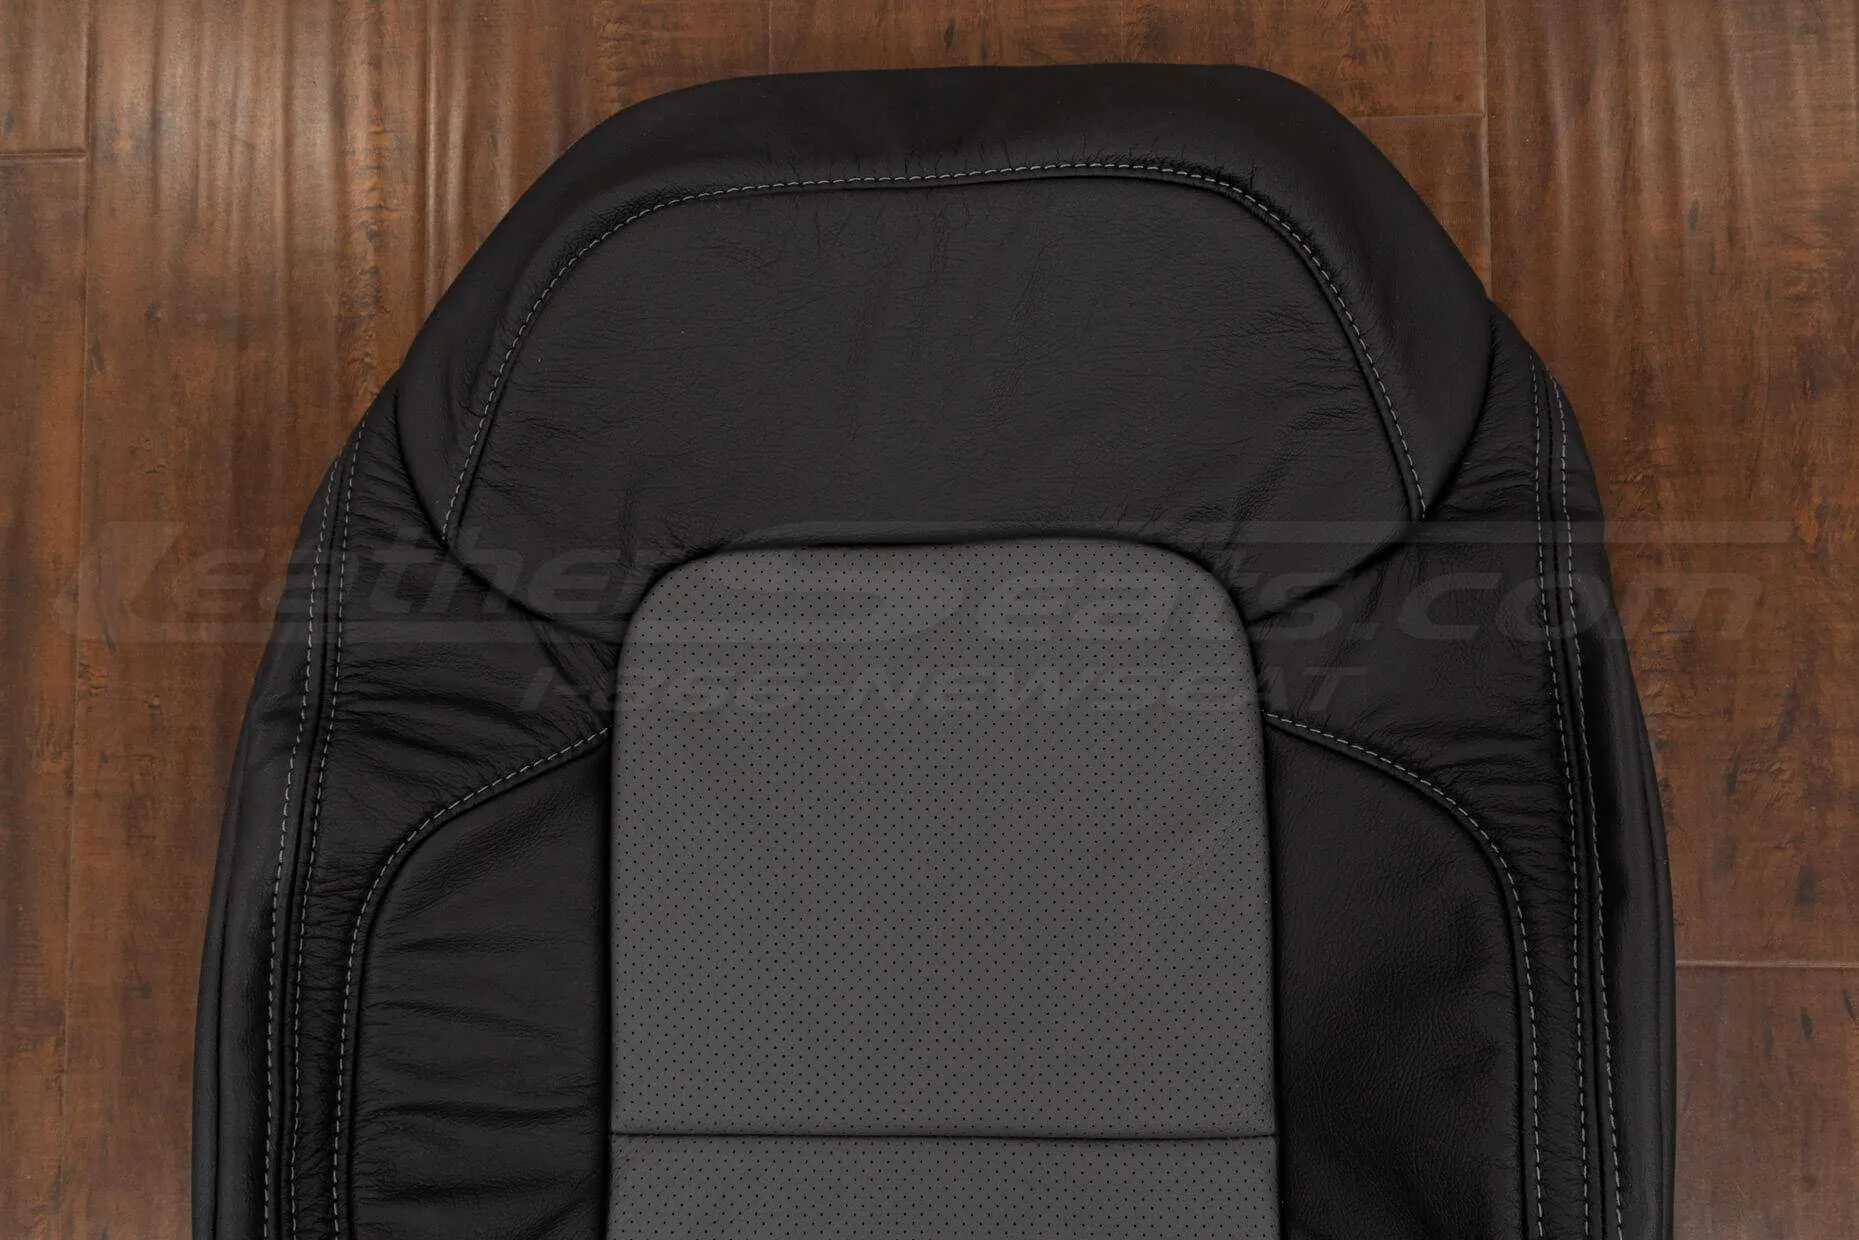 Upper section of front backrest with perforated inserts